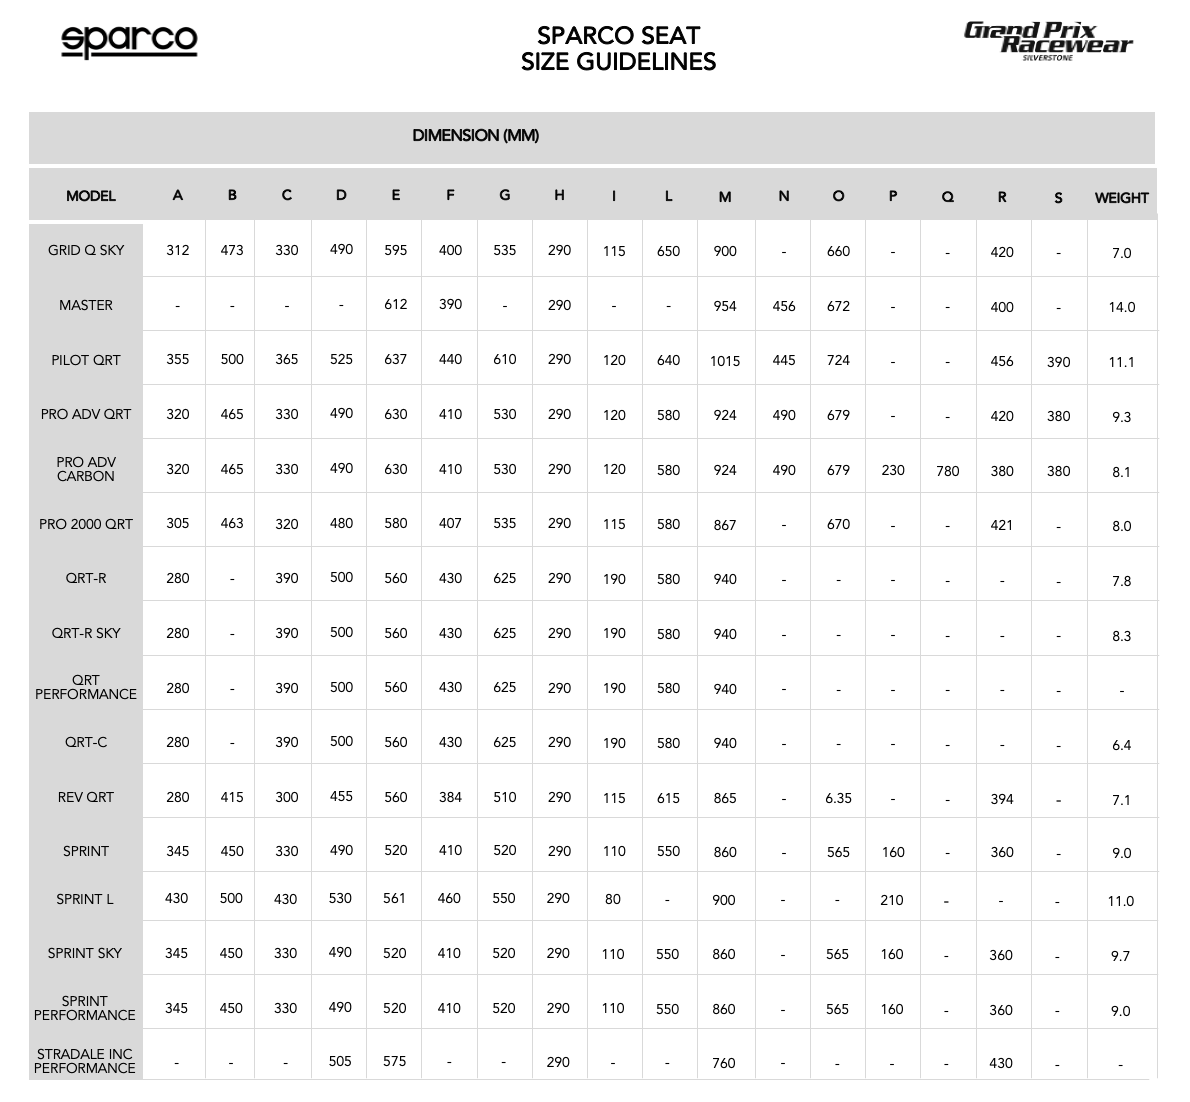 Size guide for Sparco Race Seats available from www.gprdirect.com